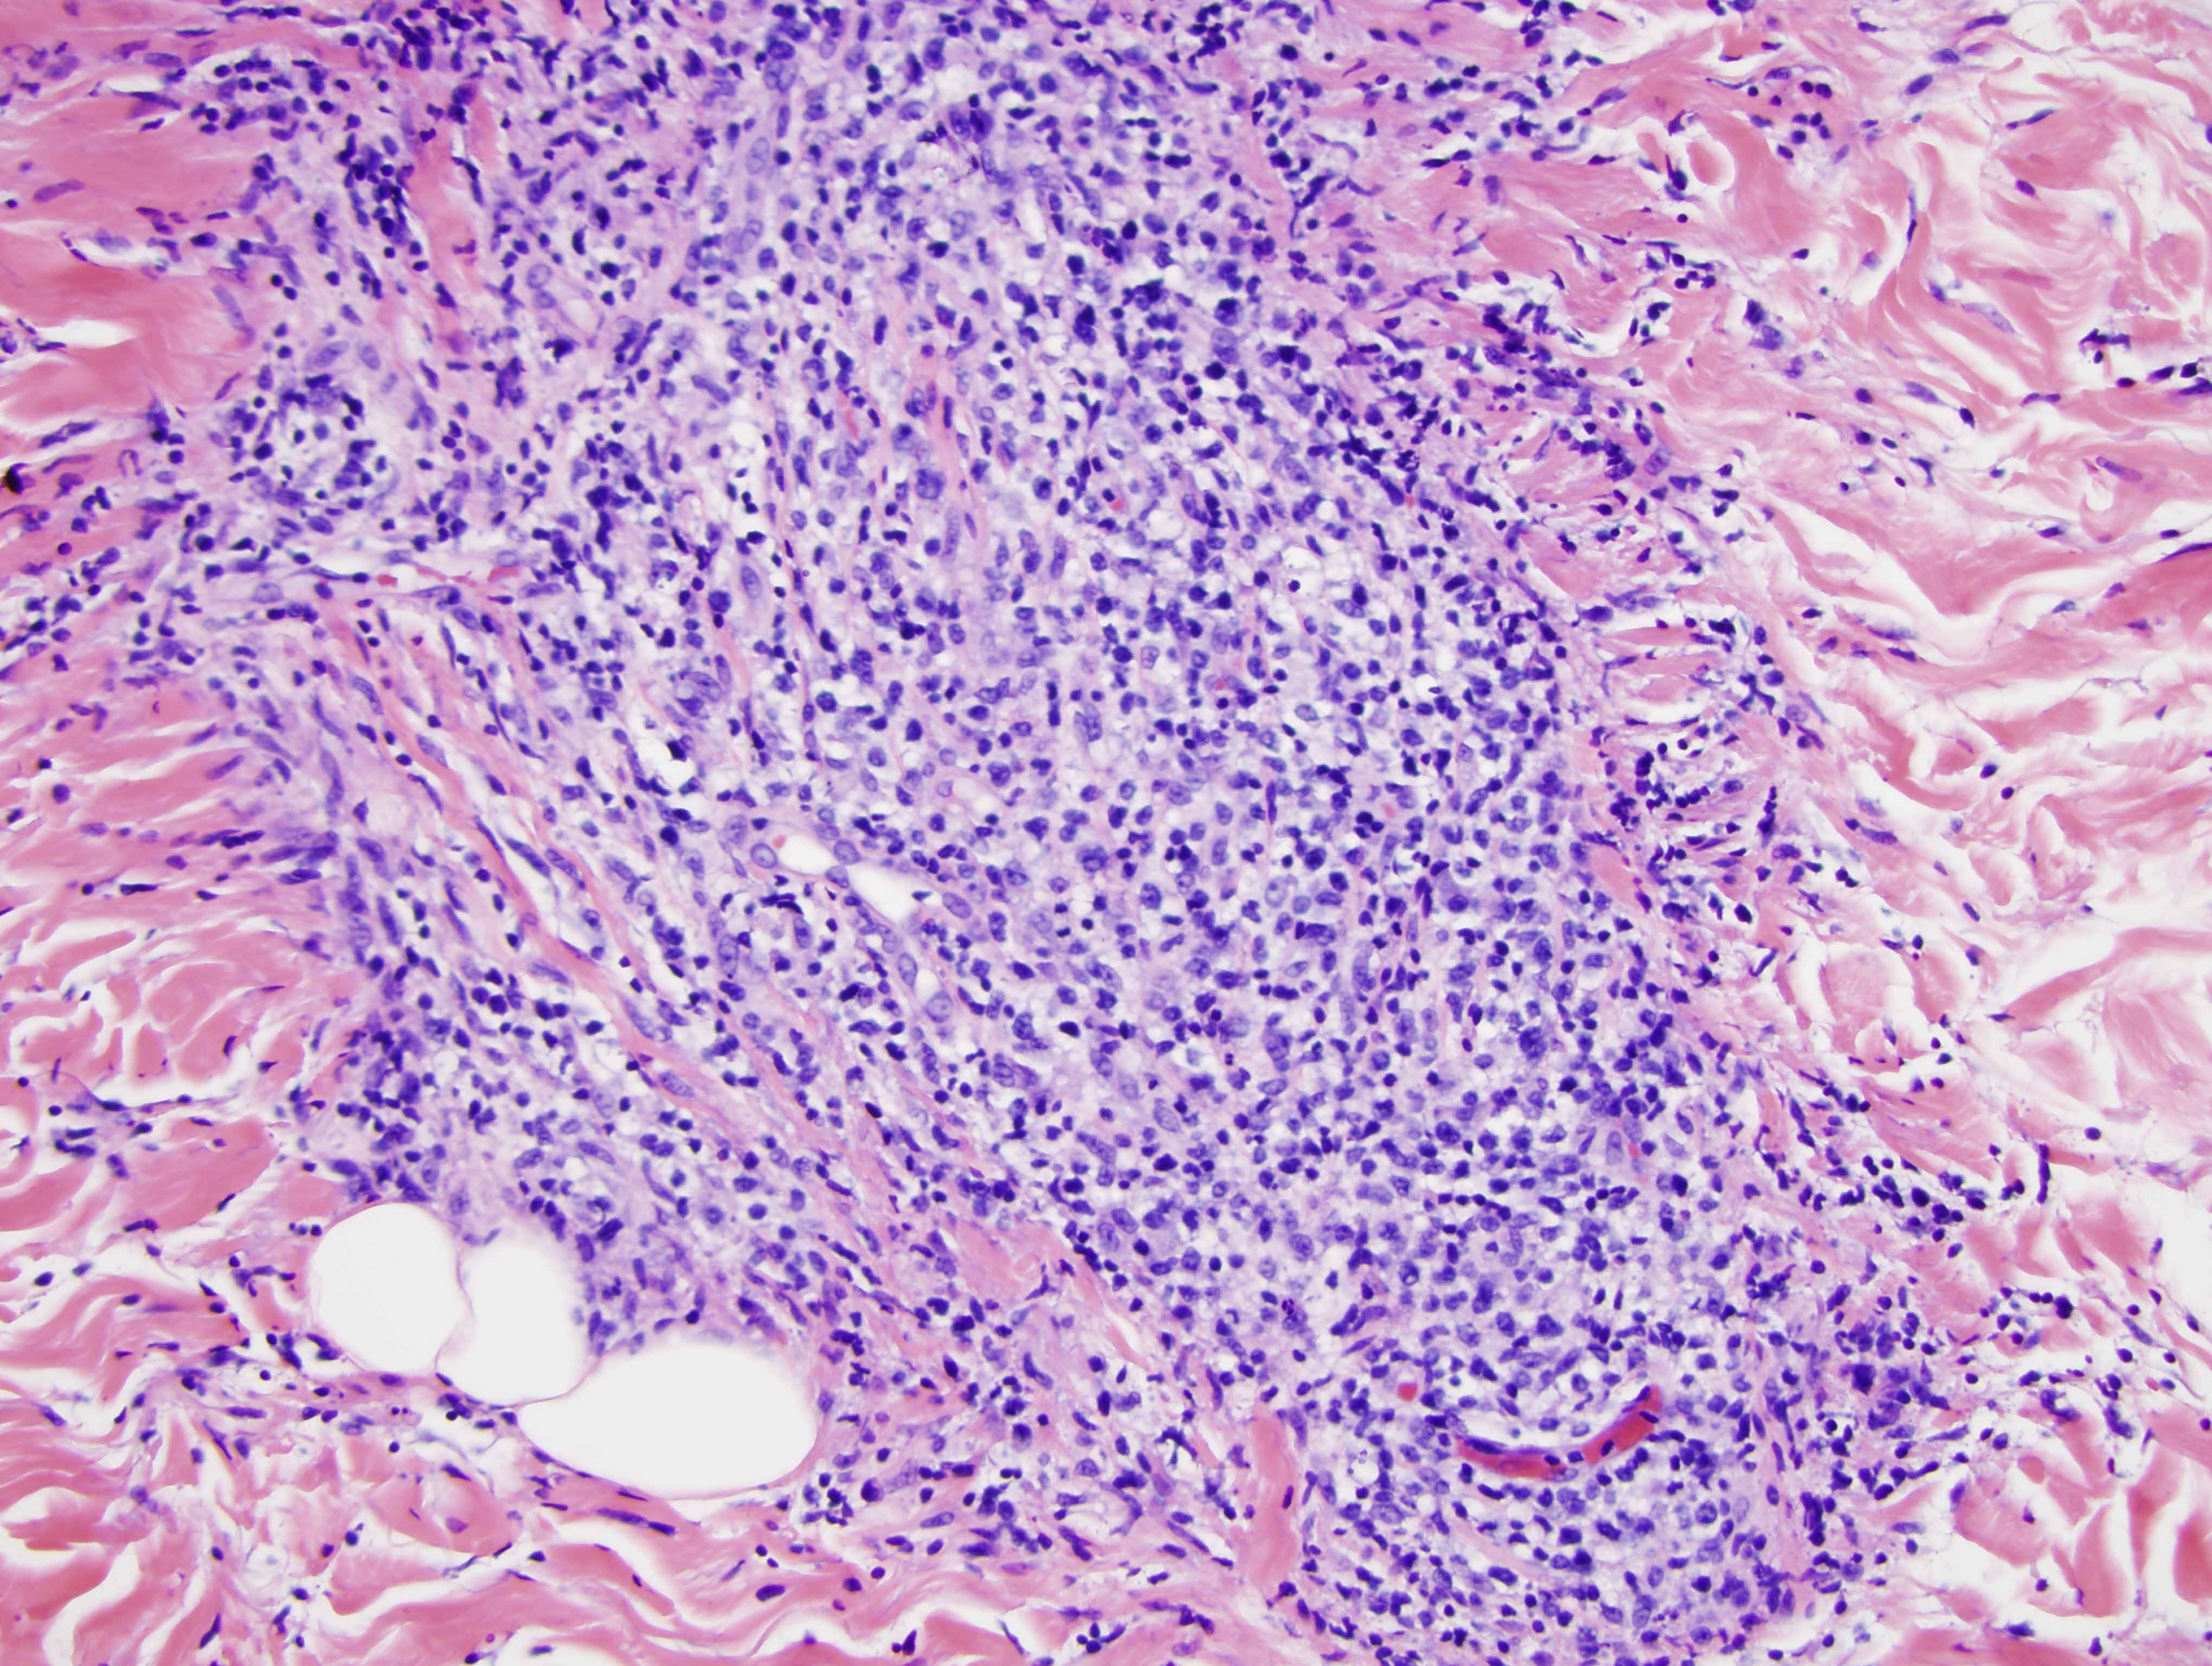 Slide 3: There is an extensive dermal infiltrate which assumes a very orderly arrangement around blood vessels, nerves and the eccrine coil.  There is some component of interstitial infiltration as well.  This infiltrate is very atypical and far exceeds the degree of intraepidermal lymphoid atypia recognizing that there is likely a histomorphologic spectrum of this abnormal lymphoid process ranging from the smaller lymphocytes that prevail in the epidermis to the larger ones found in the dermis.  Within the dermis there are many lymphocytes that are in the 15-20 micron size range.